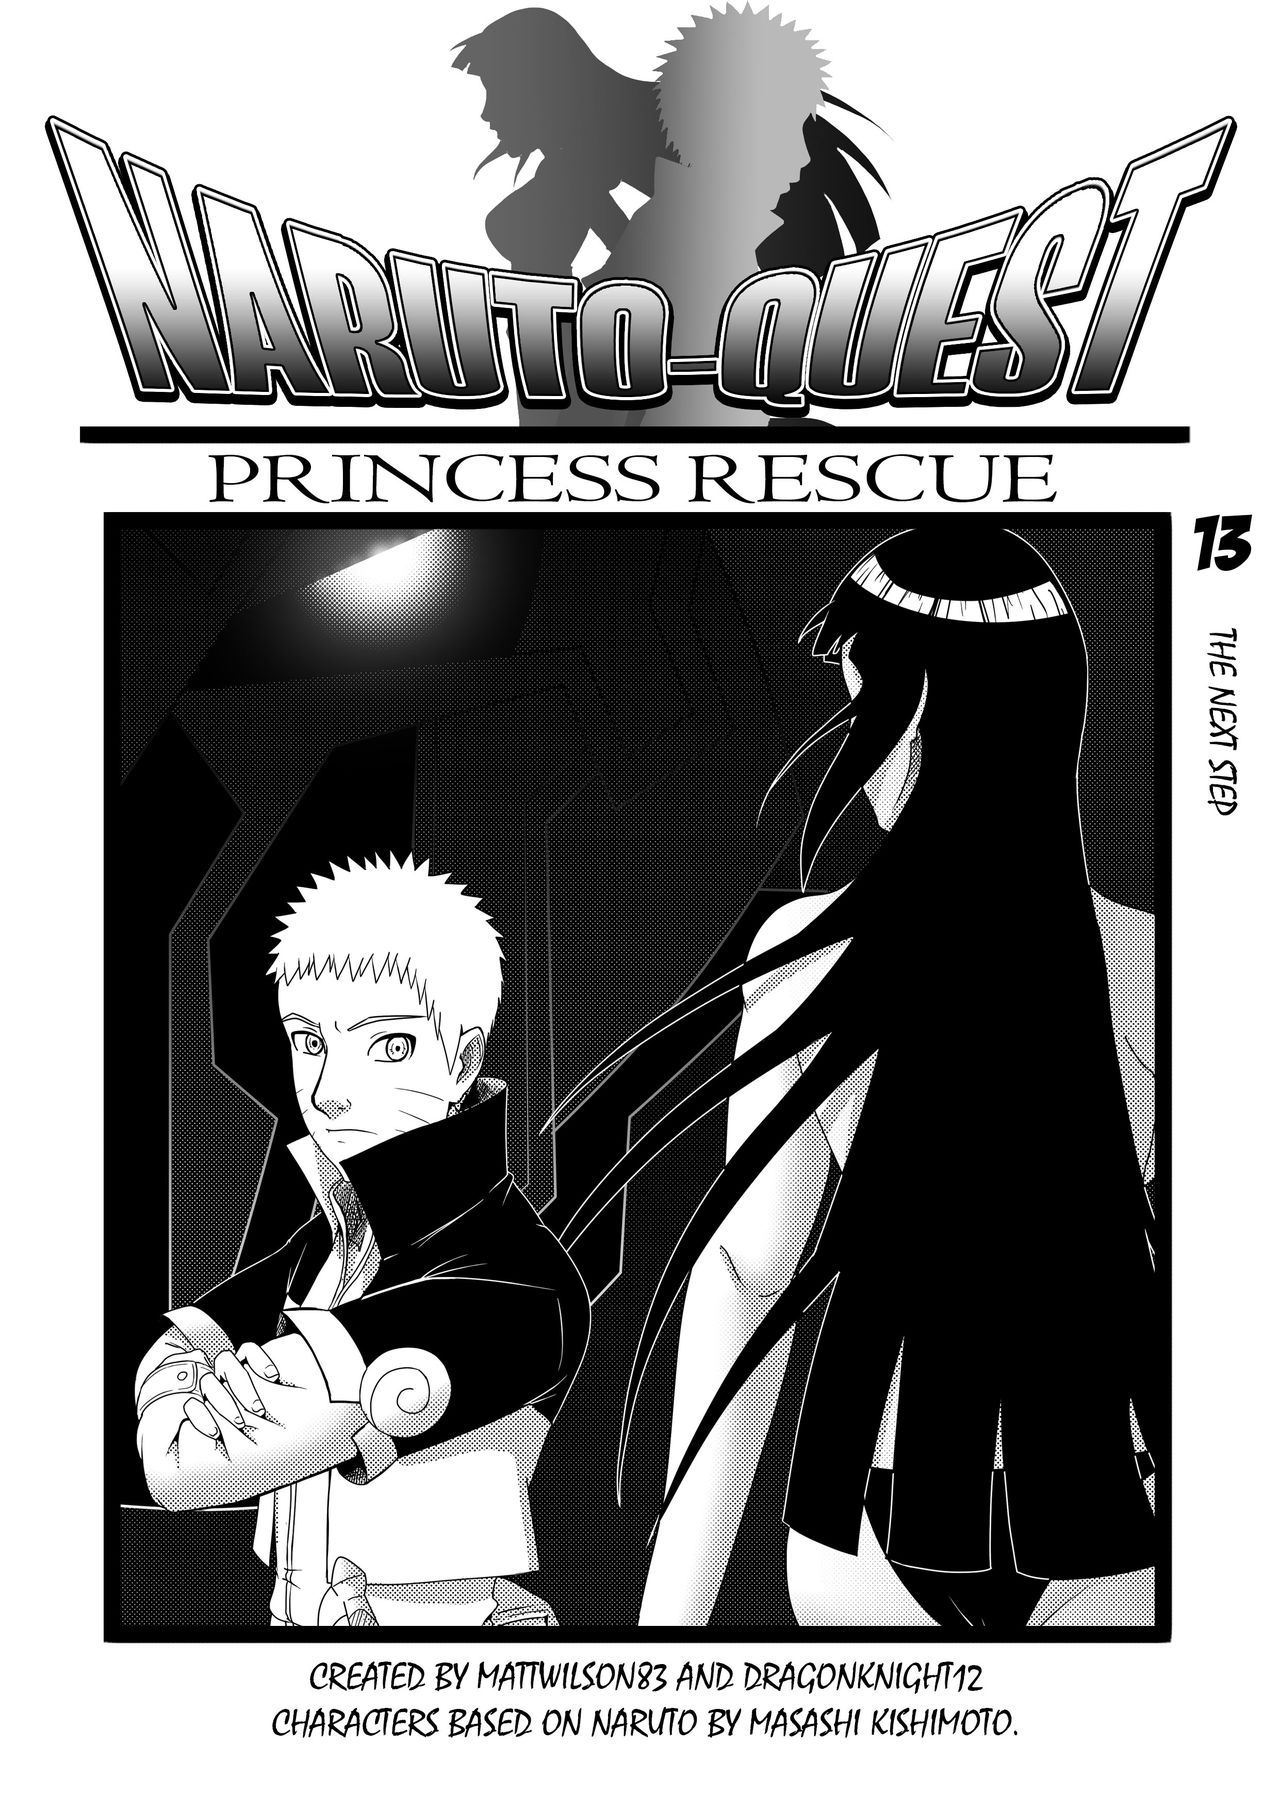 NarutoQuest: Princess Rescue 0-13(on-going) 259